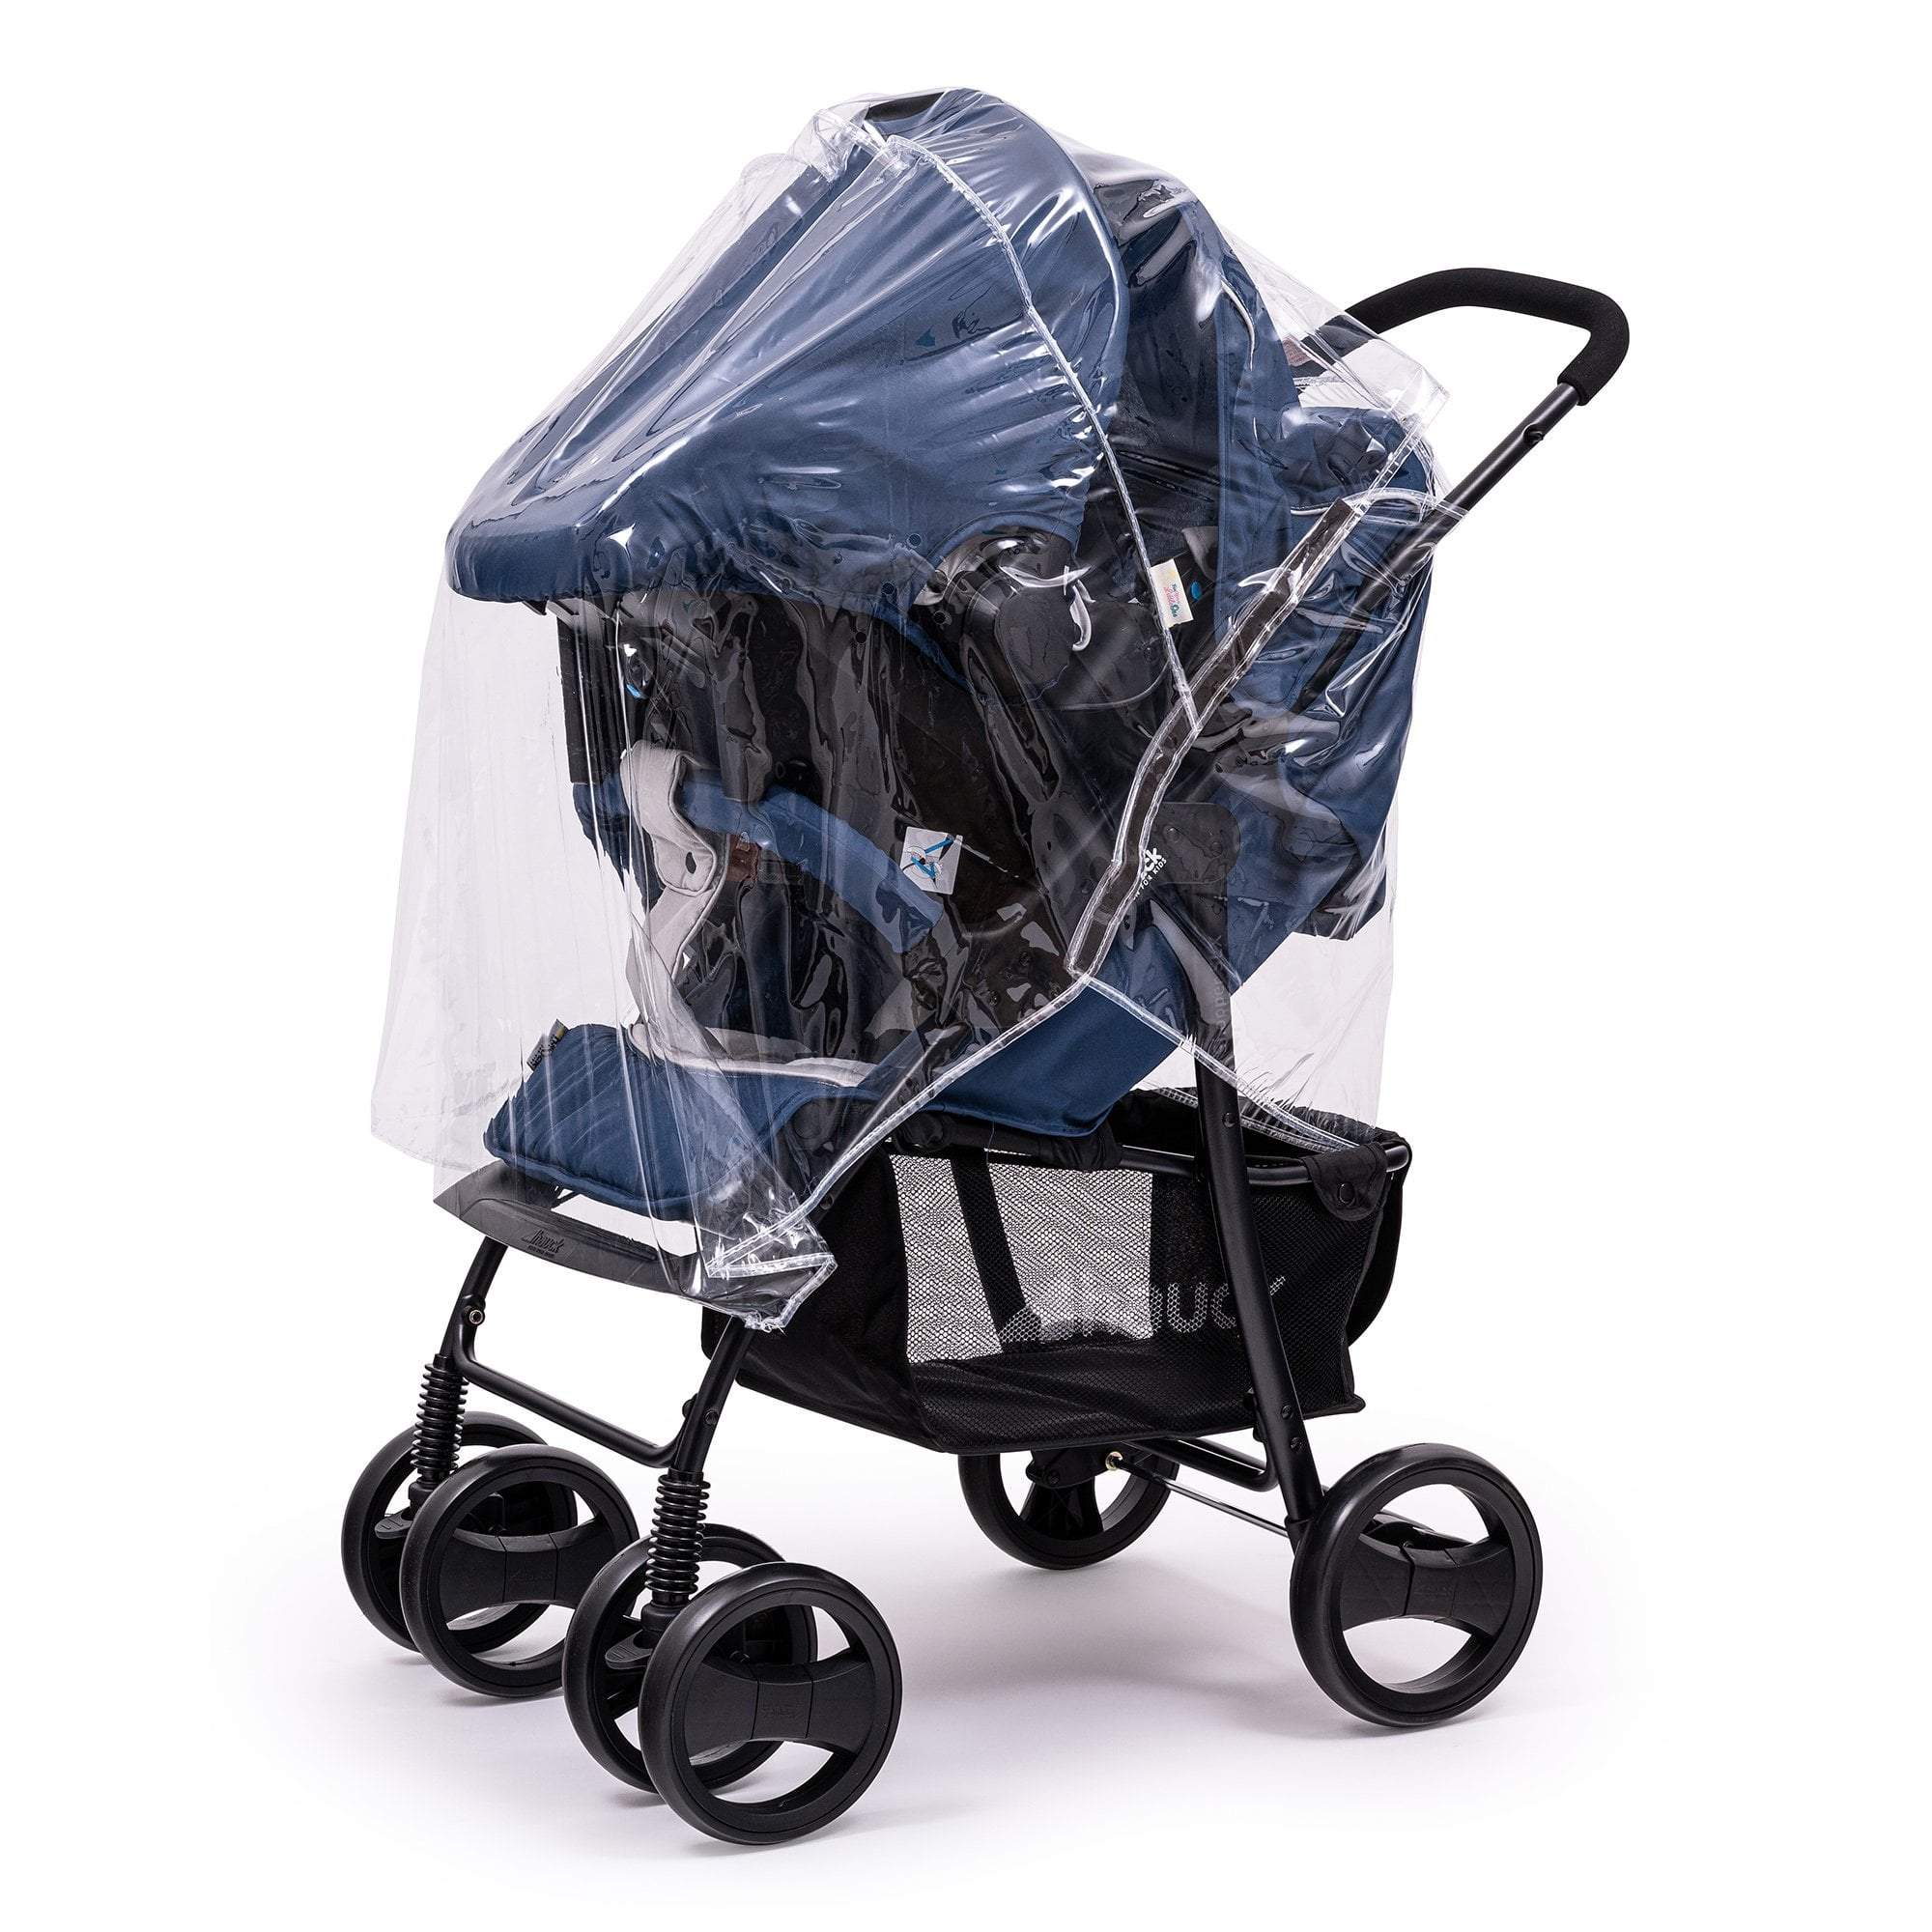 Travel System Raincover Compatible with Babywelt - Fits All Models - For Your Little One